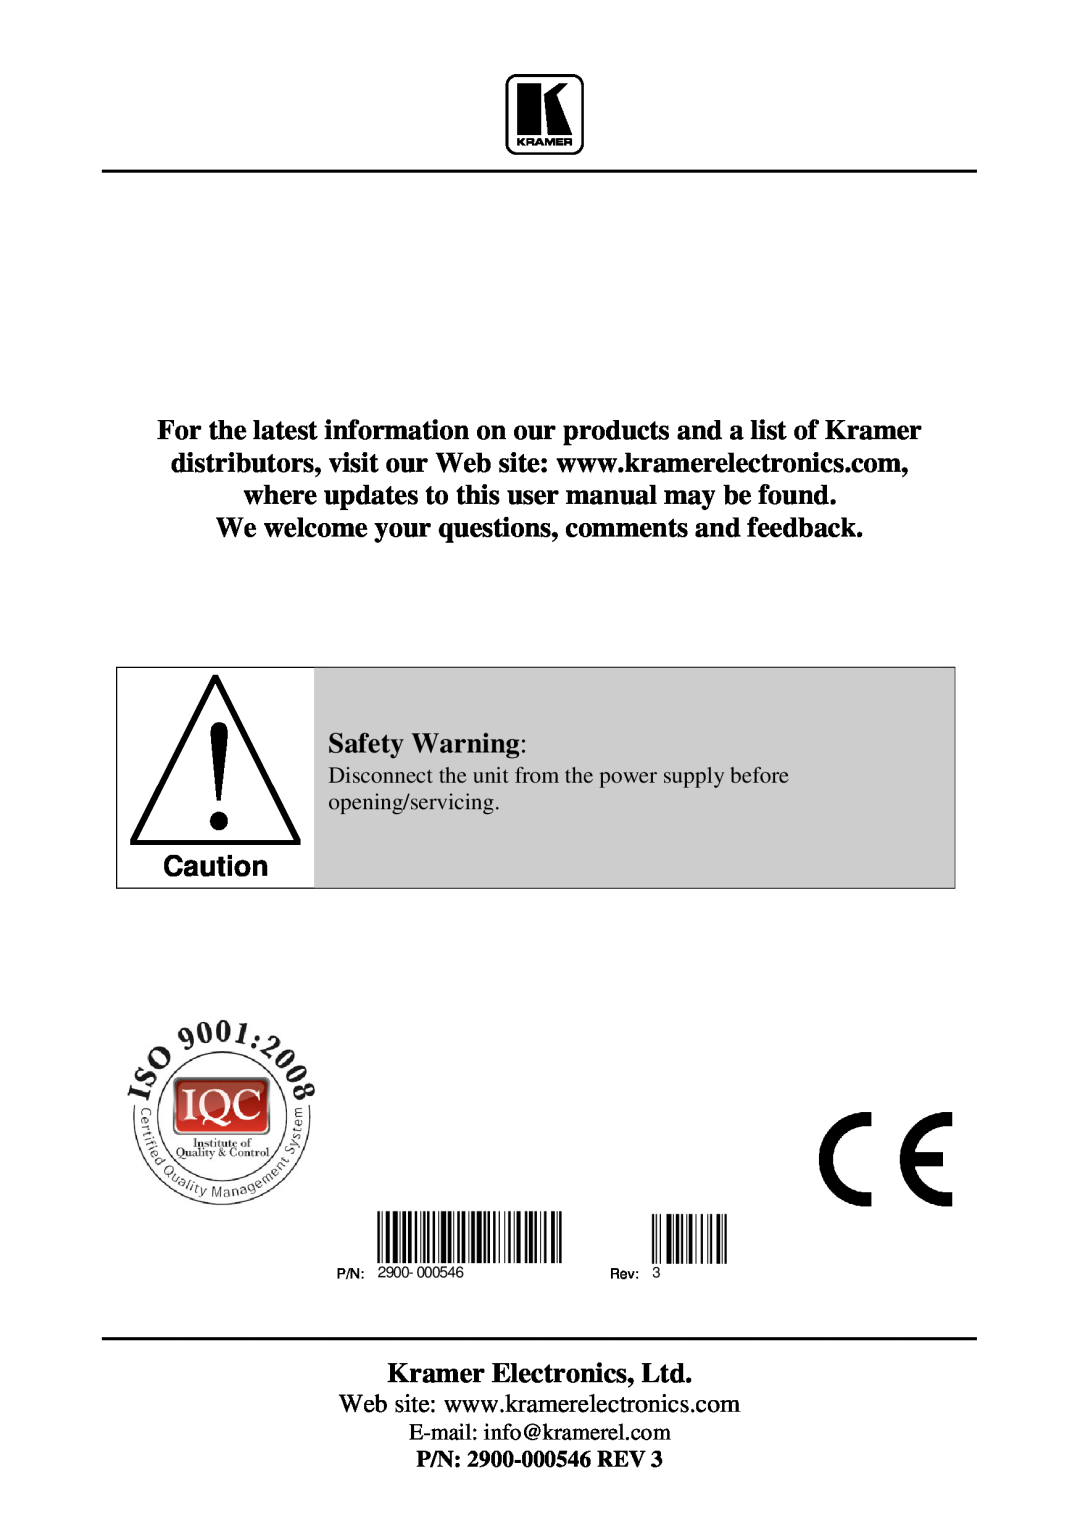 Kramer Electronics RC-2C We welcome your questions, comments and feedback, Safety Warning, P/N 2900-000546REV, Rev 